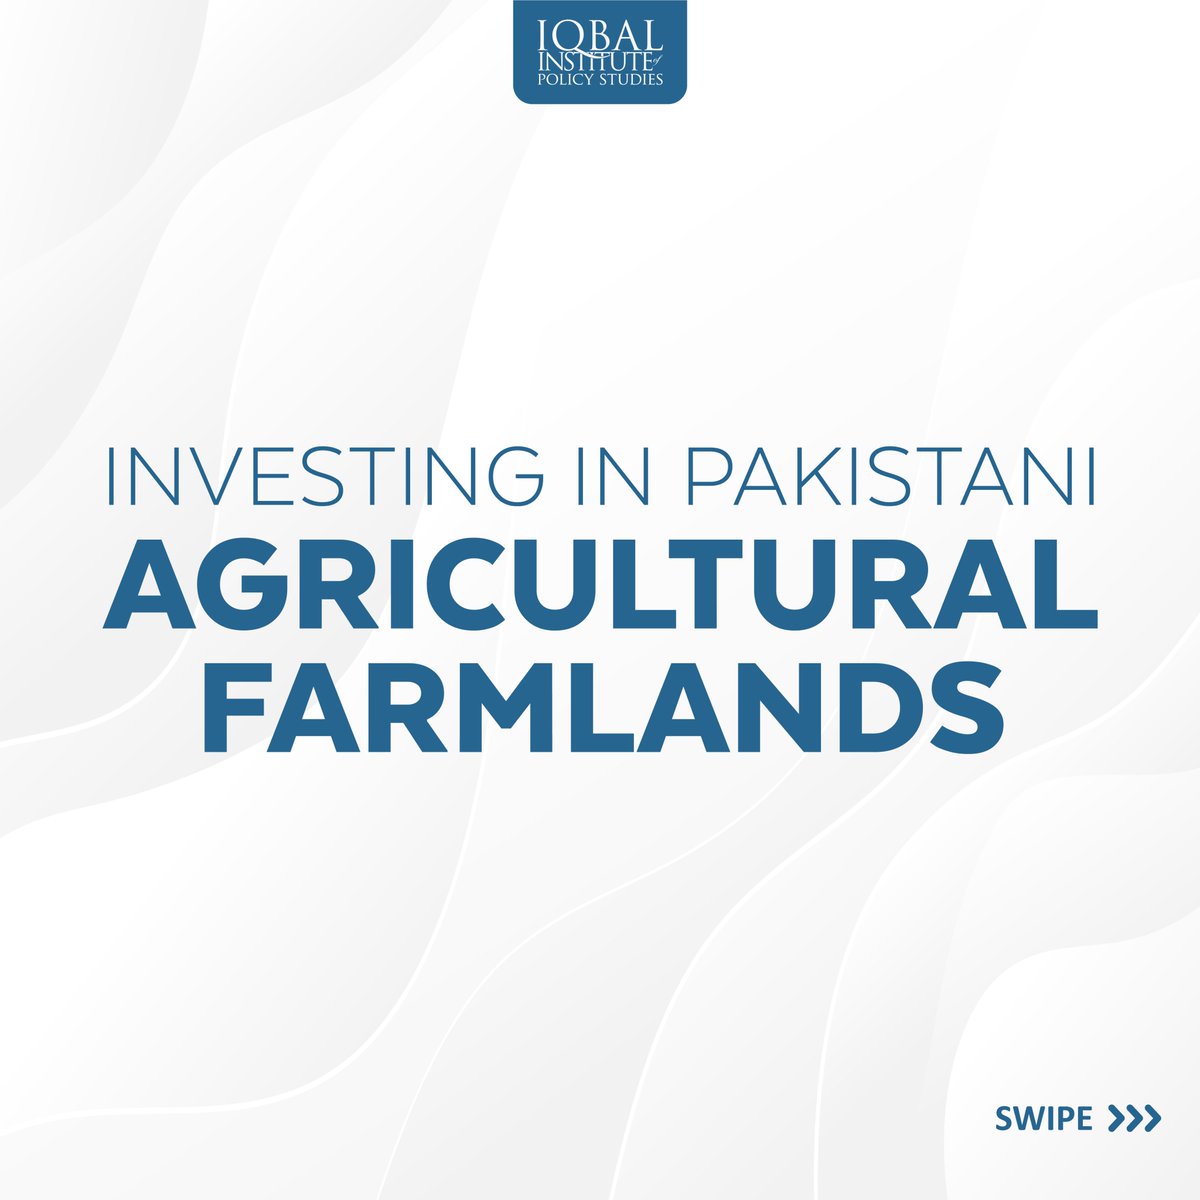 Investing in Pakistani Agriculture Farmlands
#AgricultureInvestment #PakistaniFarmlands #AgricultureOpportunities #InvestinPakistan #FarmlandInvestment #SustainableAgriculture 
iips.com.pk/investing-in-p…